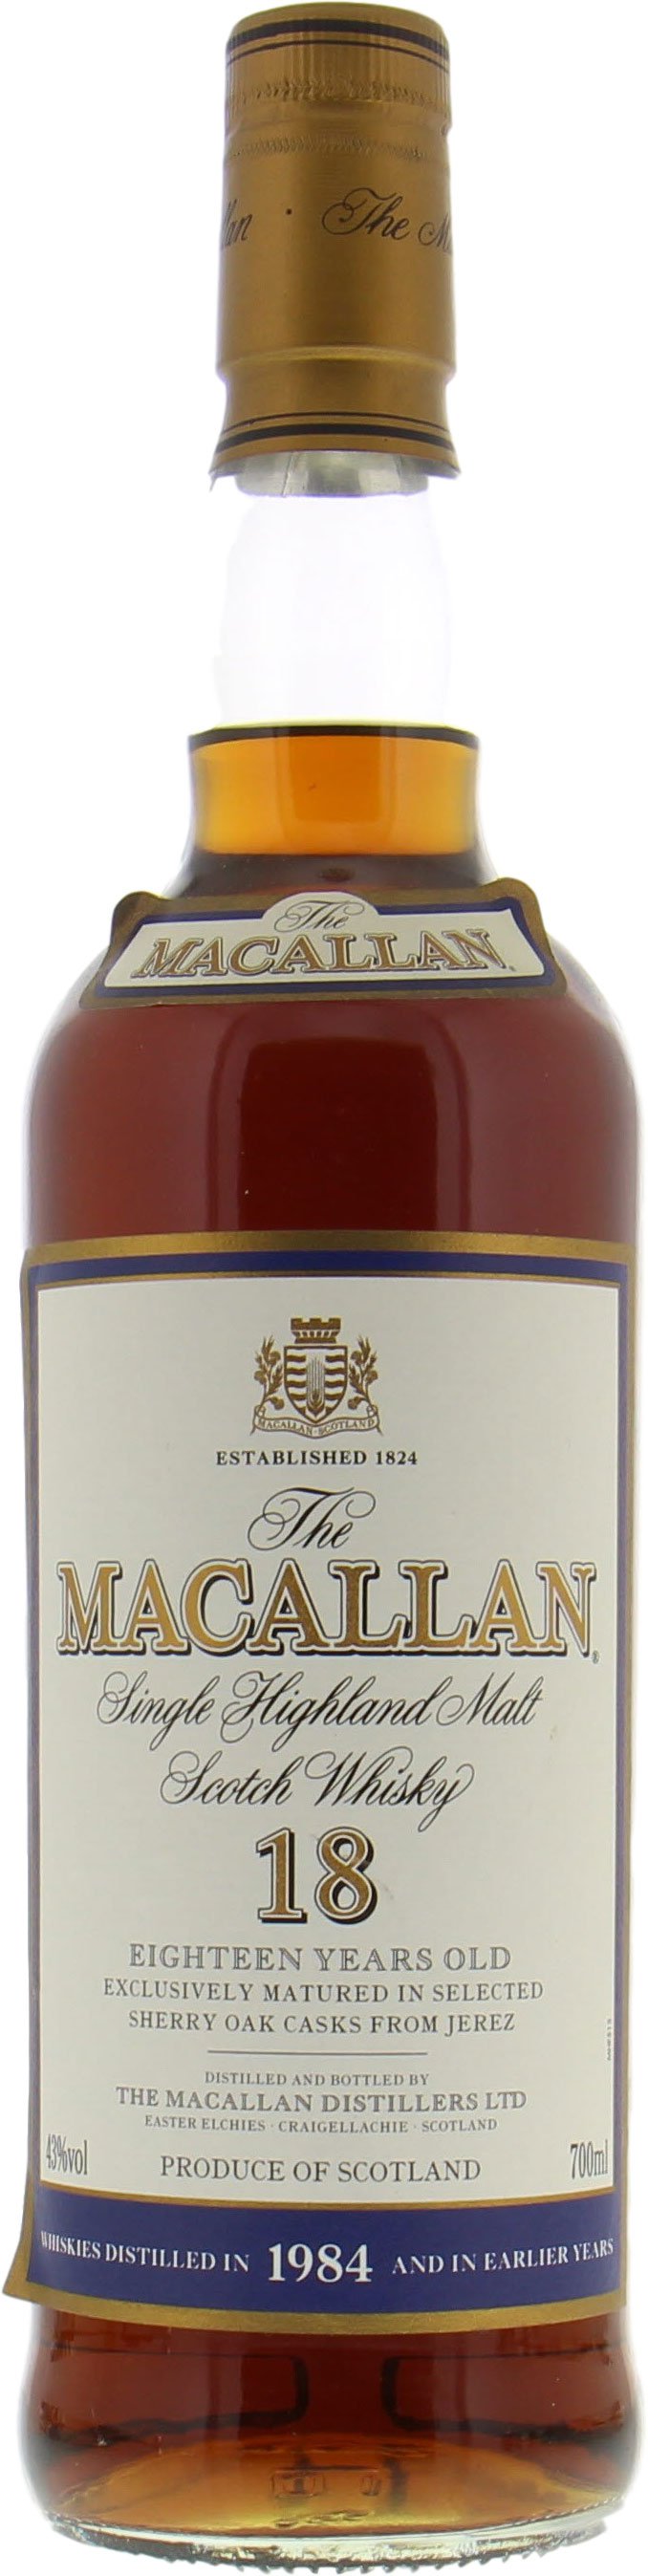 Macallan - 18 Years Old Vintage 1984 43% 1984 No Original Container Included!